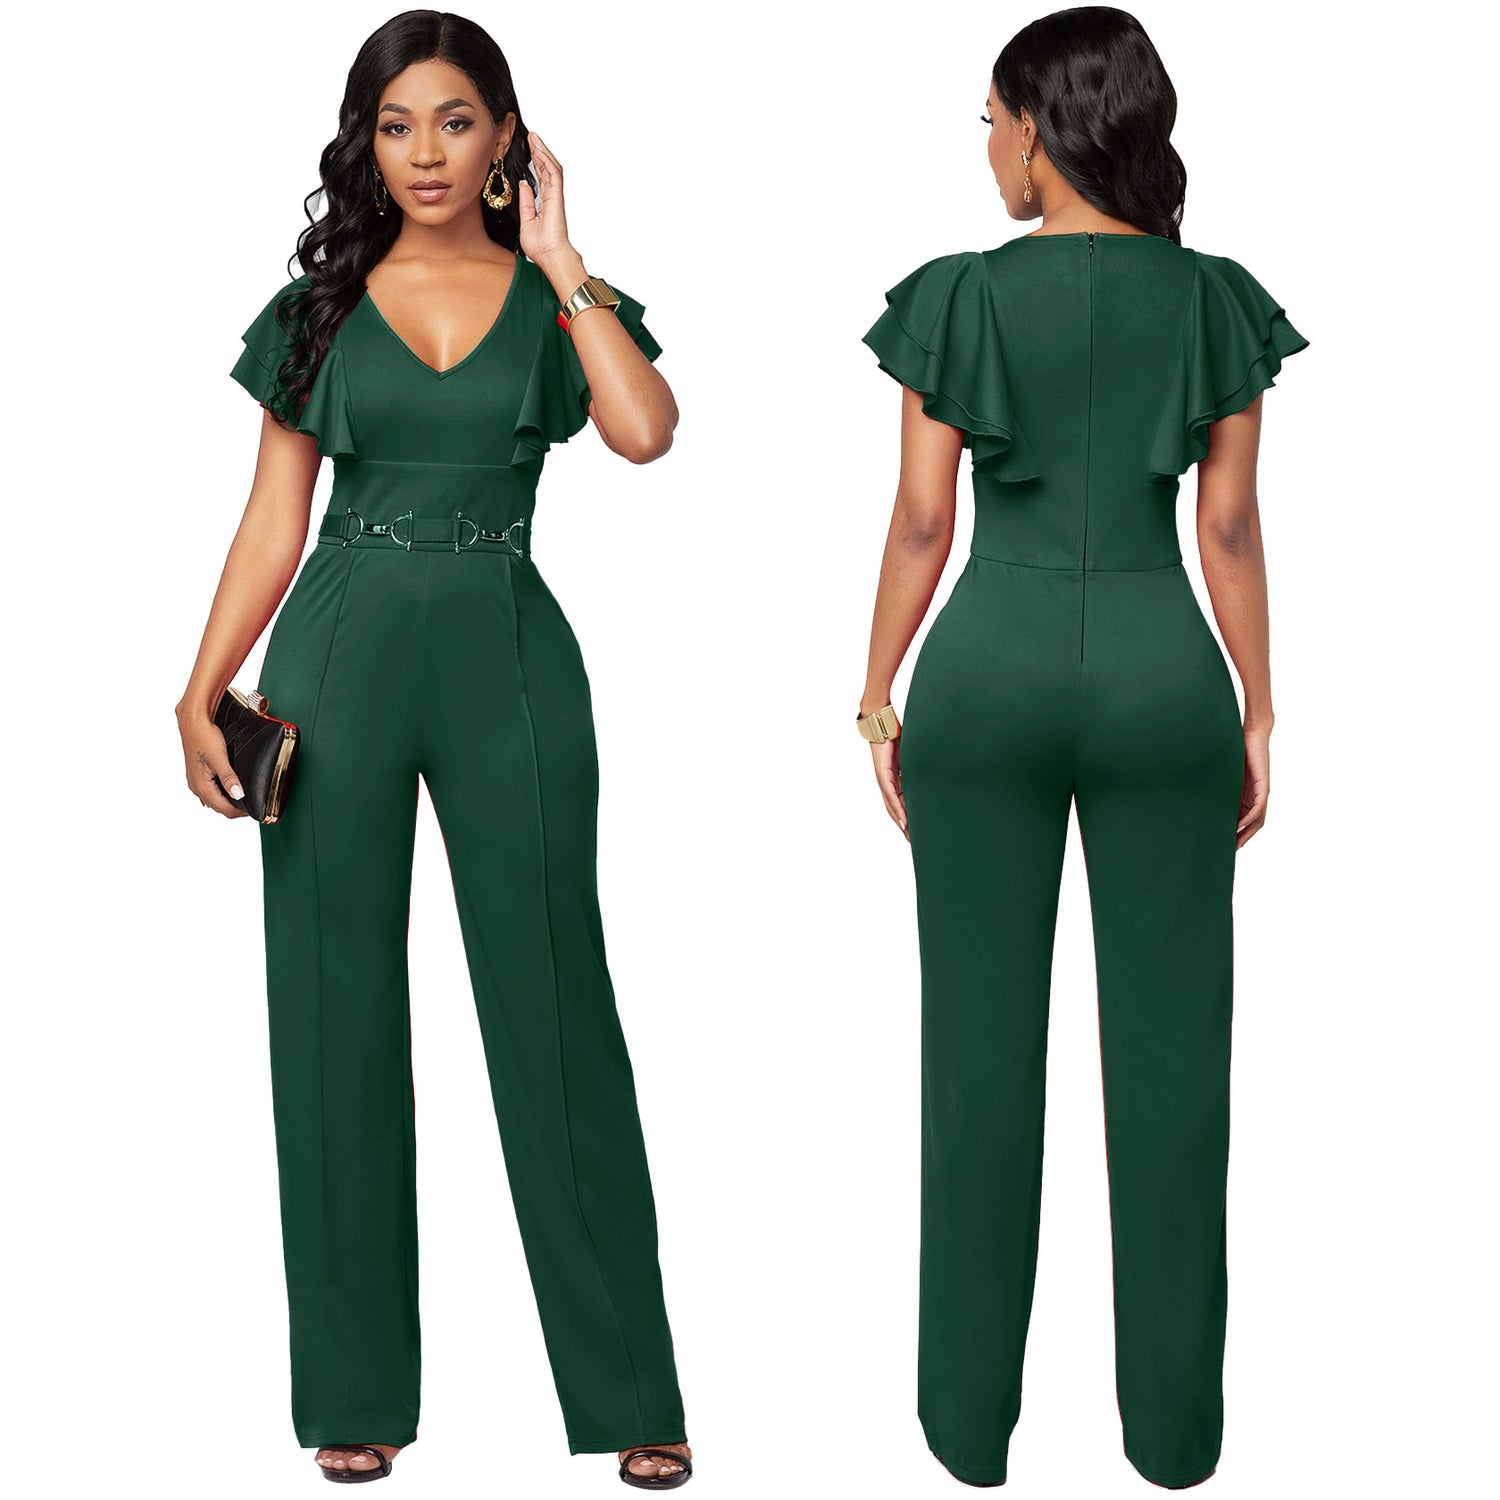 Jumpsuit  | Sexy Casual Fashion Long-sleeved V-neck Women's Jumpsuit | Green |  2XL| thecurvestory.myshopify.com